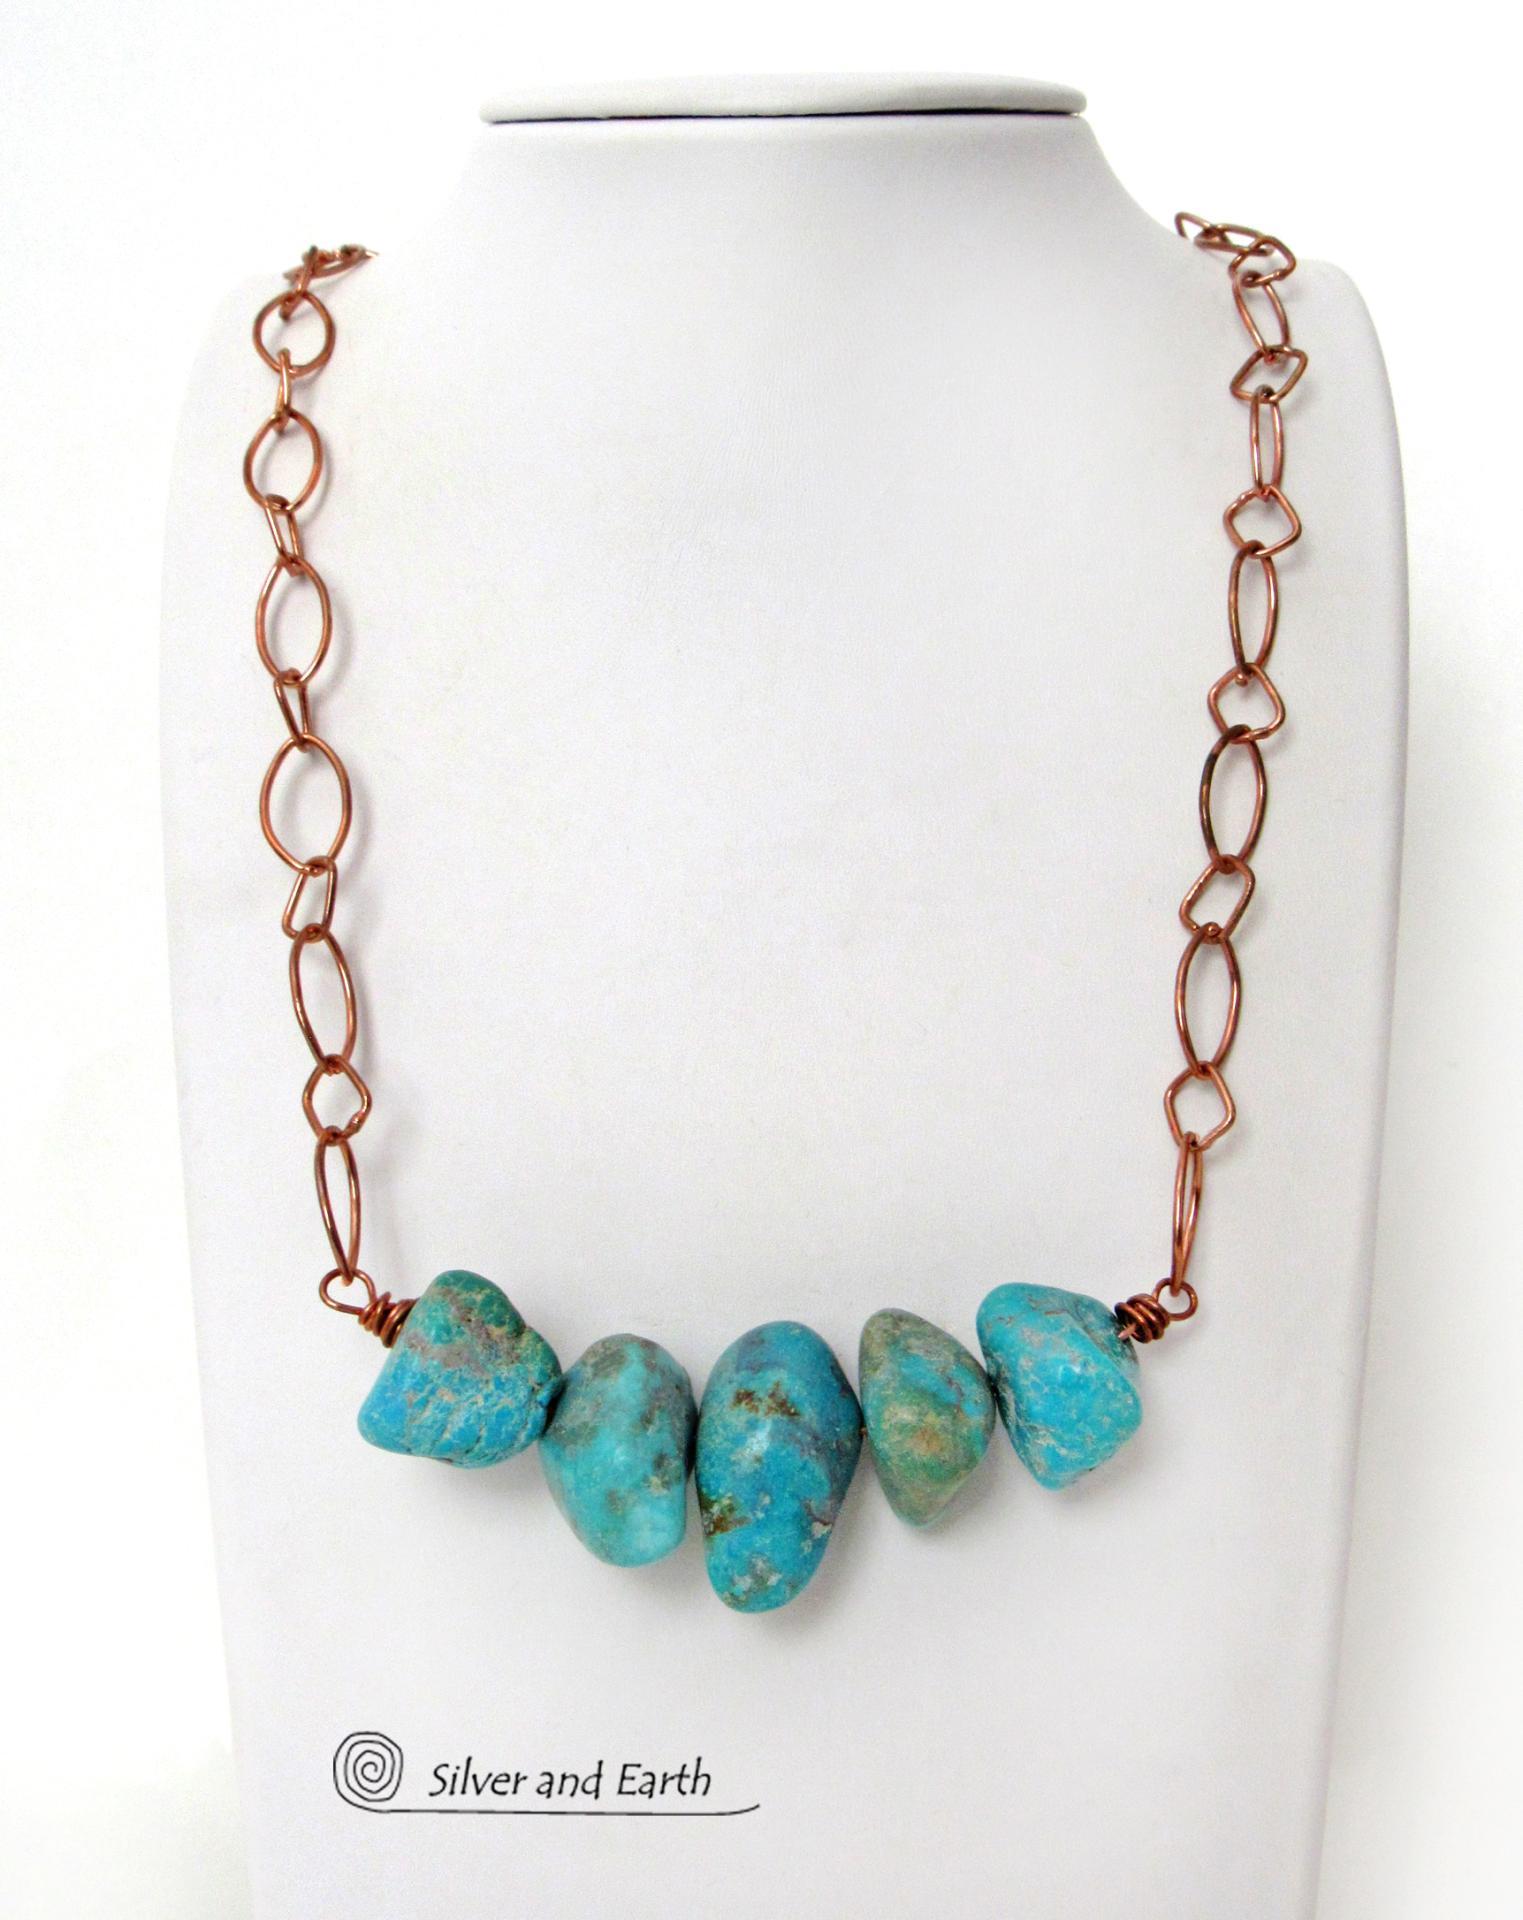 Chunky Turquoise Necklace on Copper Chain - Earthy Natural Turquoise Jewelry